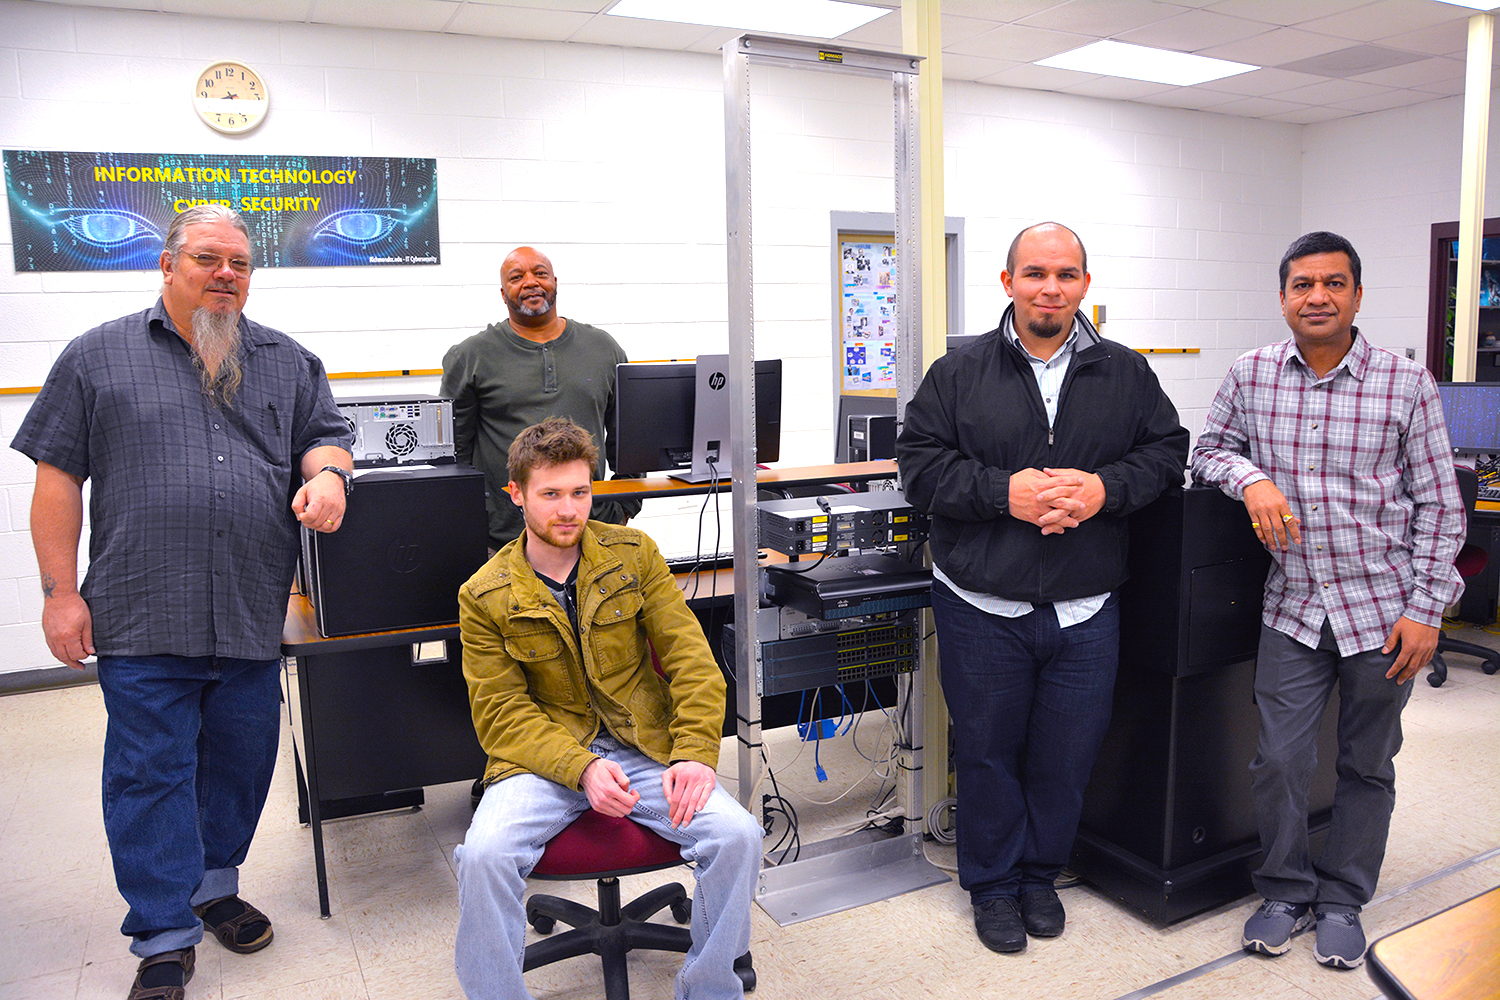 Pictured are the Richmond Community College Information Technology students who completed IT projects for FerroFab in Hamlet. From left to right are Edward Hartley, Taylor Smith (seated), Lindell Bright, Kevin Taylor and Himansu Patel